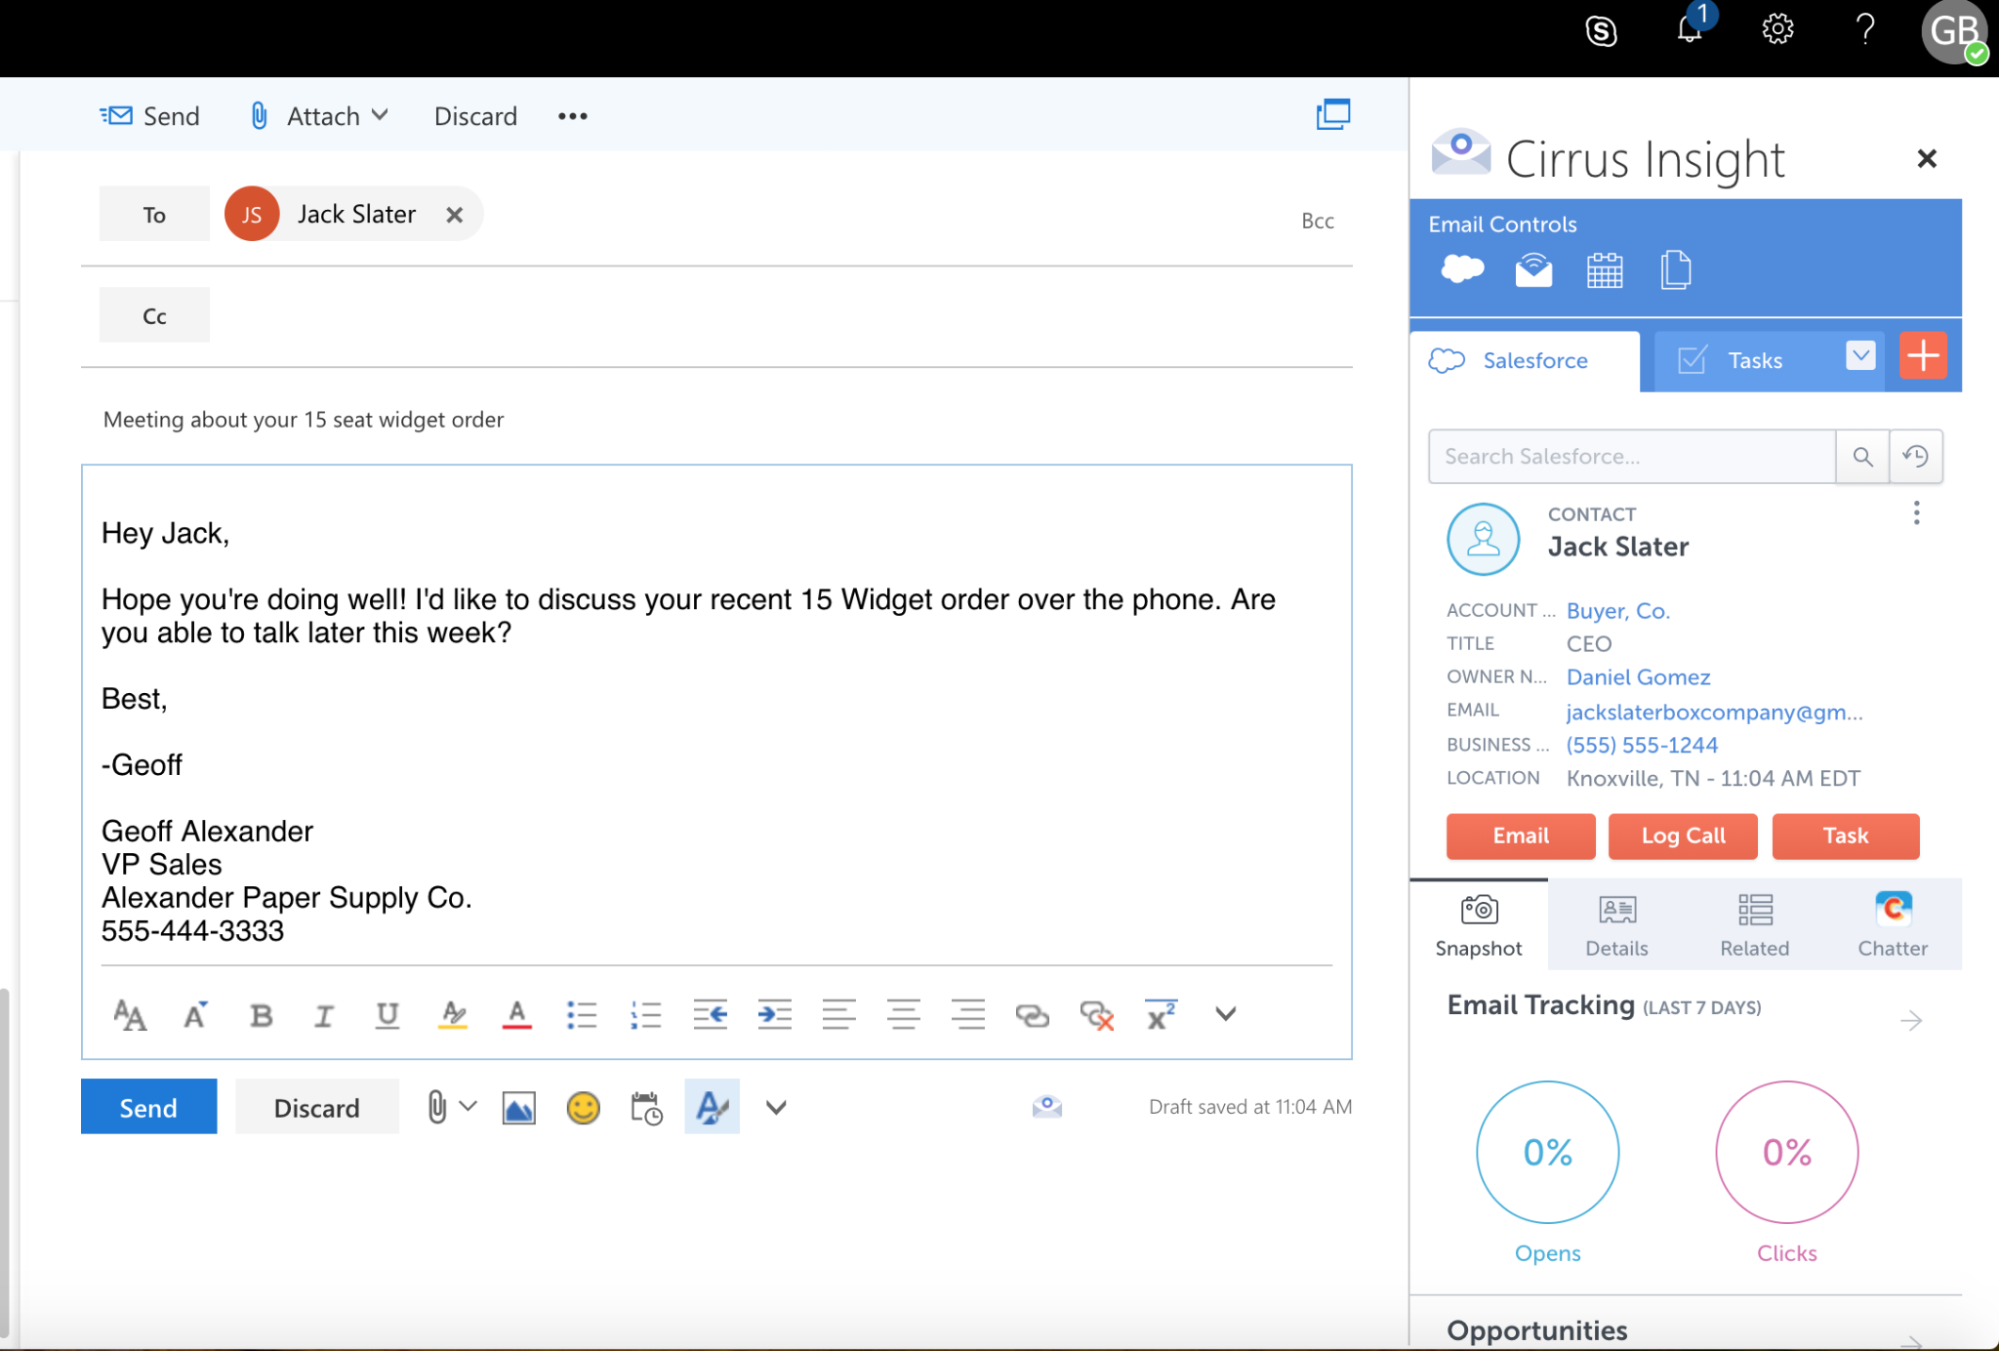 Screenshot of Cirrus Insight for Outlook email provider.